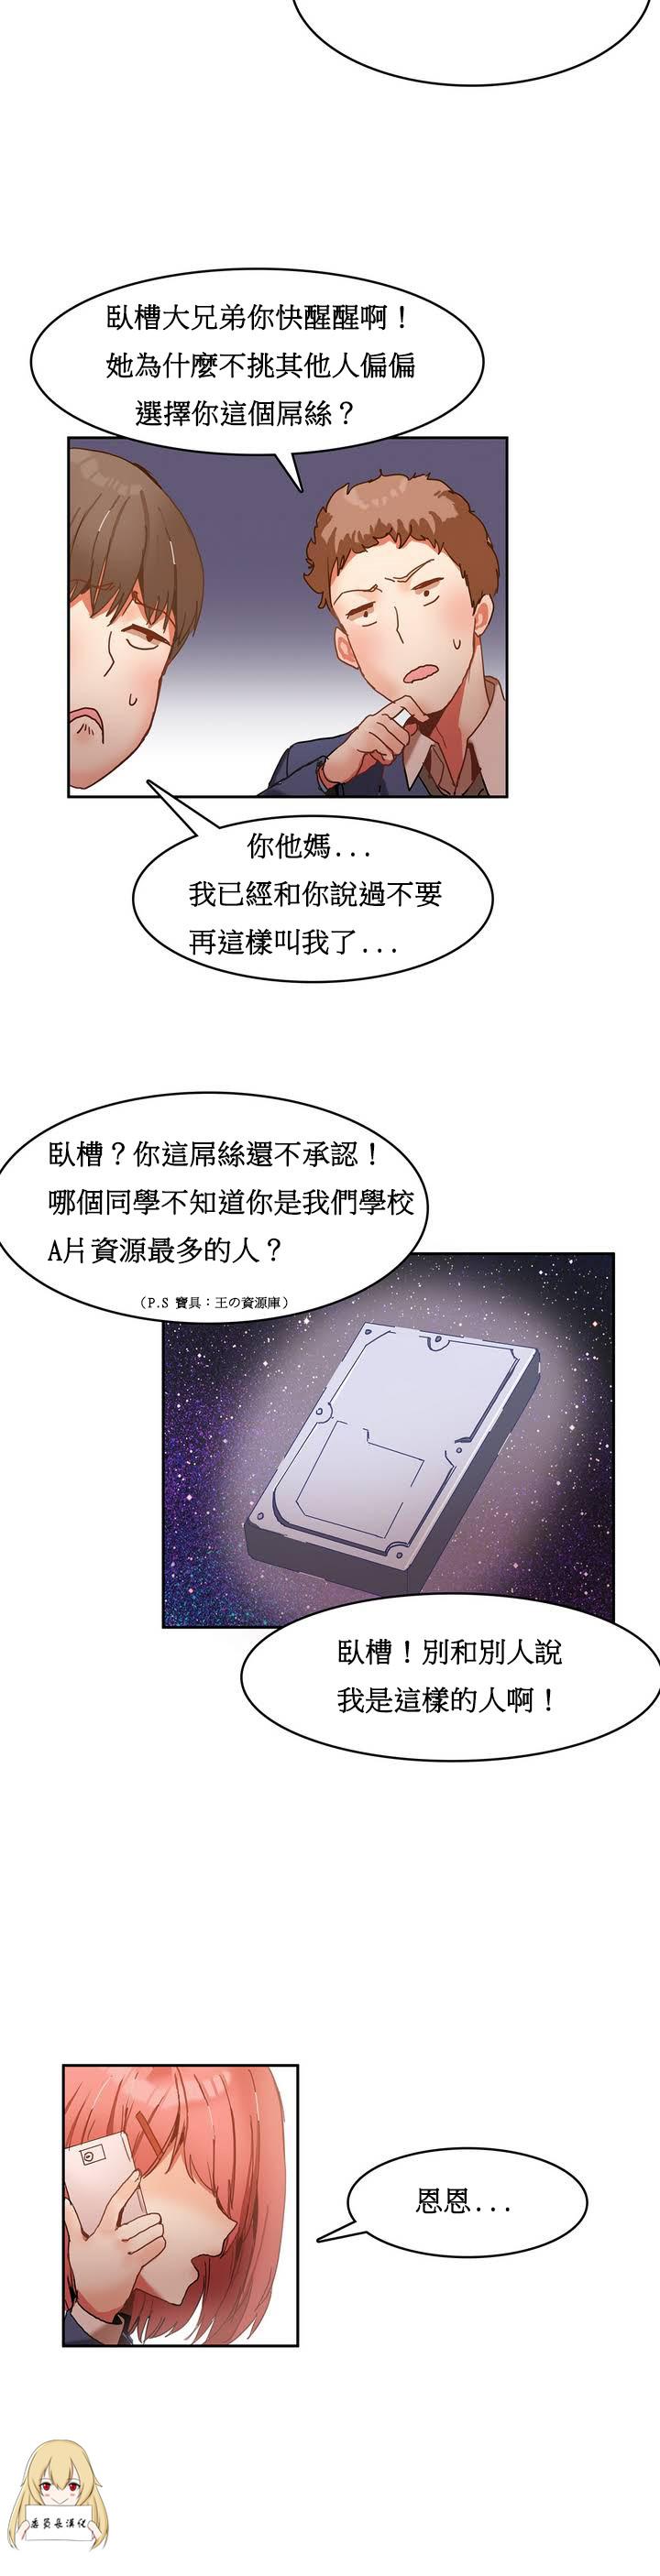 Salope Hahri's Lumpy Boardhouse Ch. 1~4【委員長個人漢化】（持續更新） Soloboy - Page 9